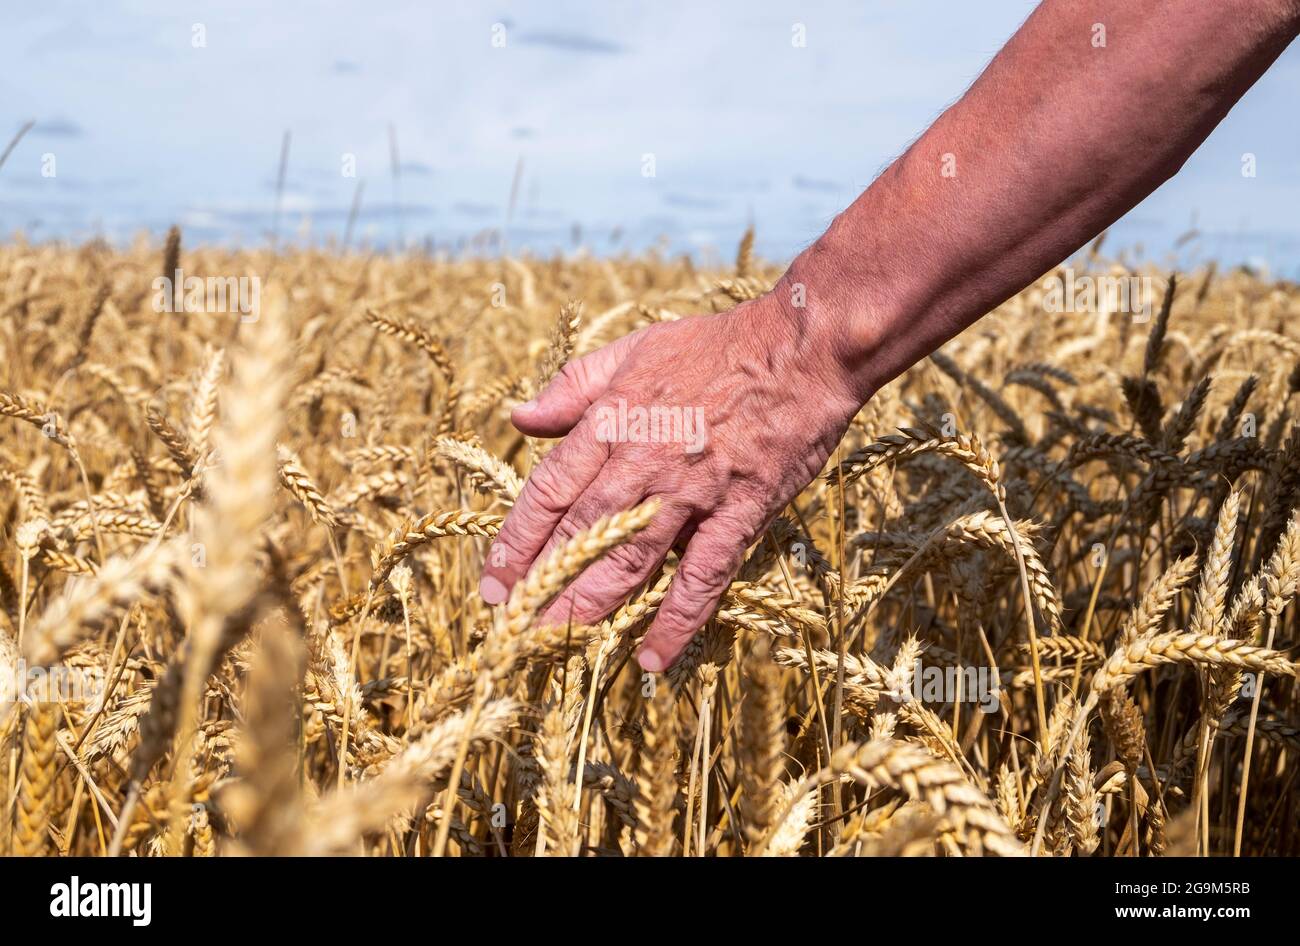 Man on a farm field is touching ears of ripe cereals Stock Photo